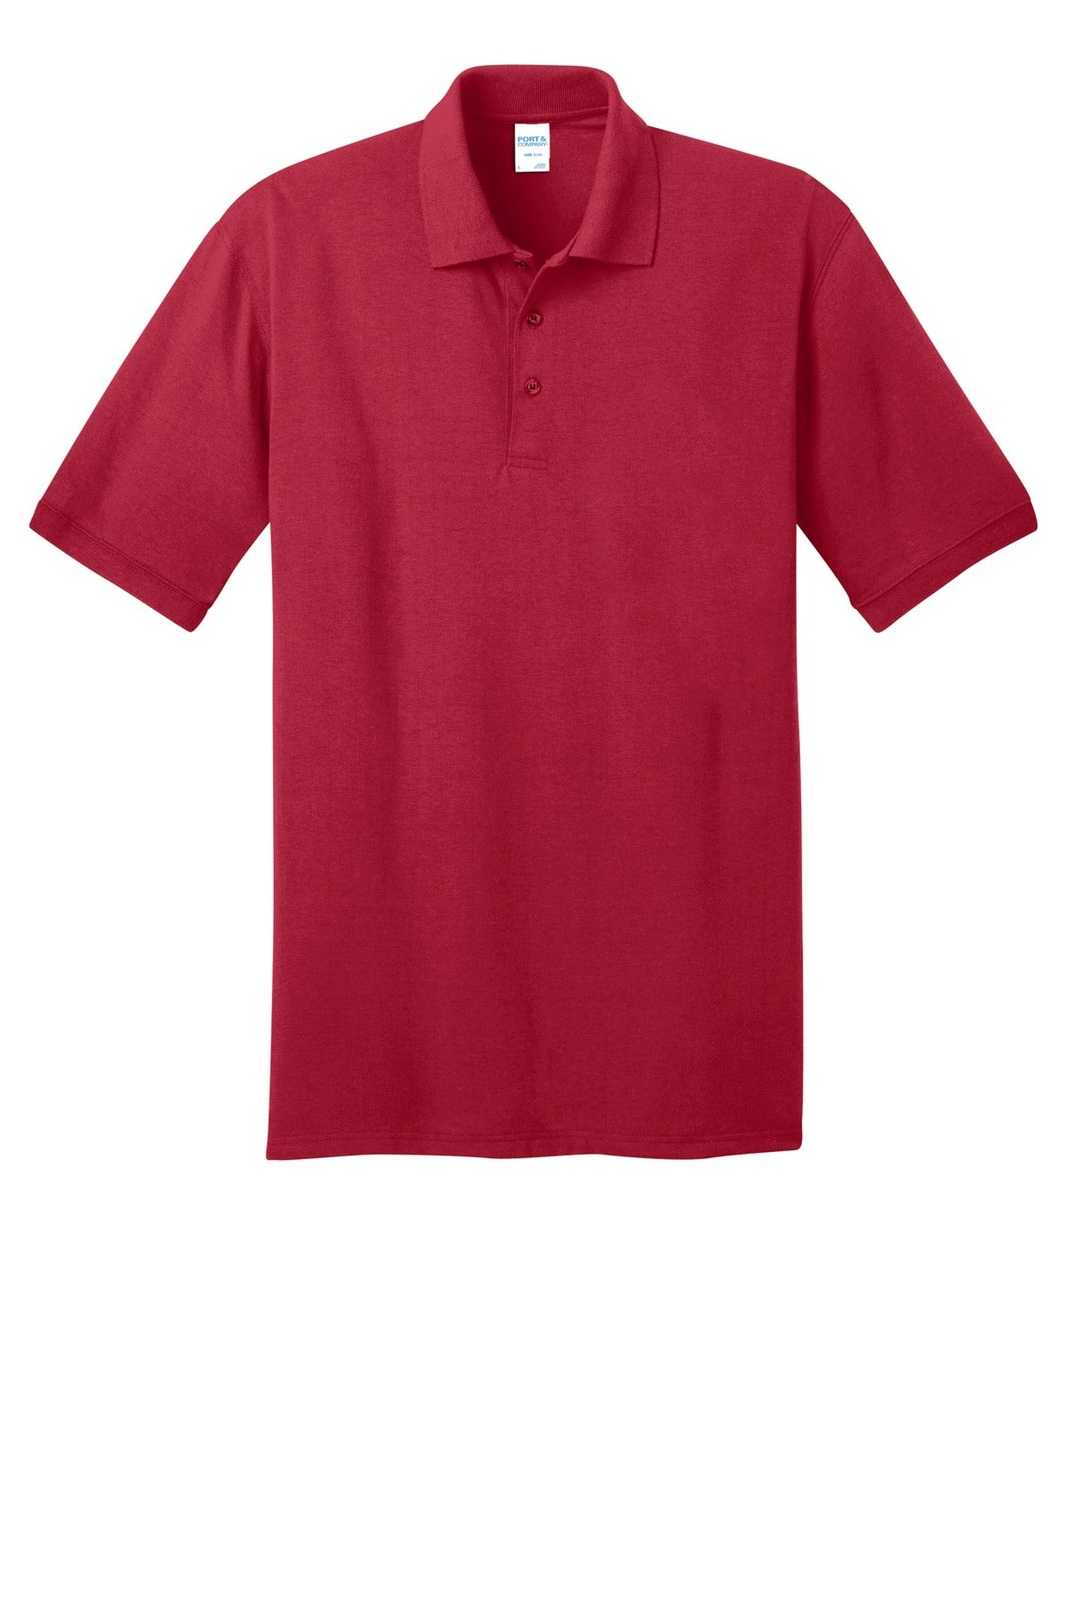 Port & Company KP55T Tall Core Blend Jersey Knit Polo - Red - HIT a Double - 1